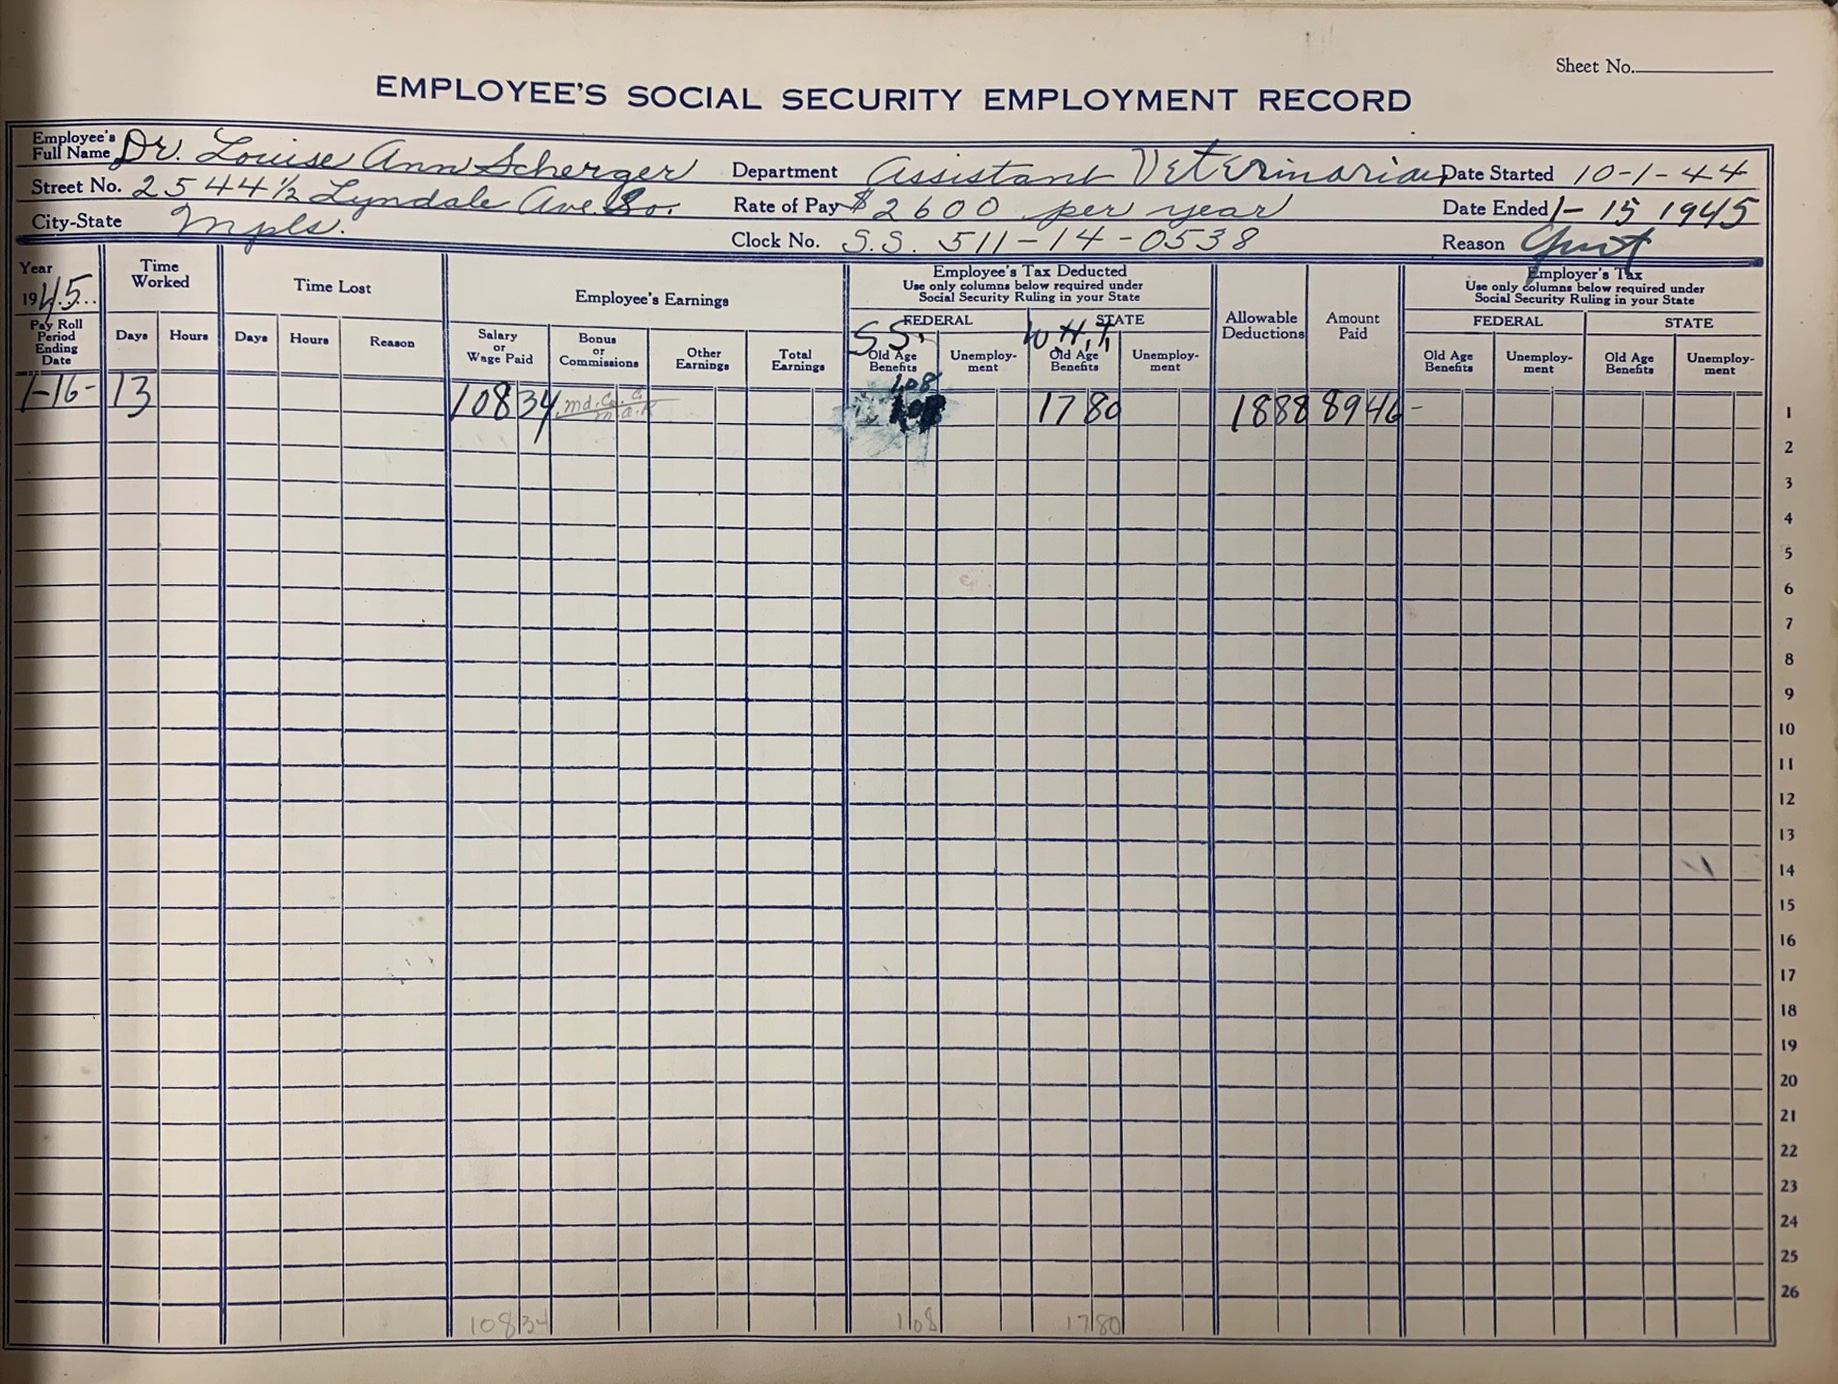 Morgan's employment recordsshow the dates during which Scherger worked for him and pay